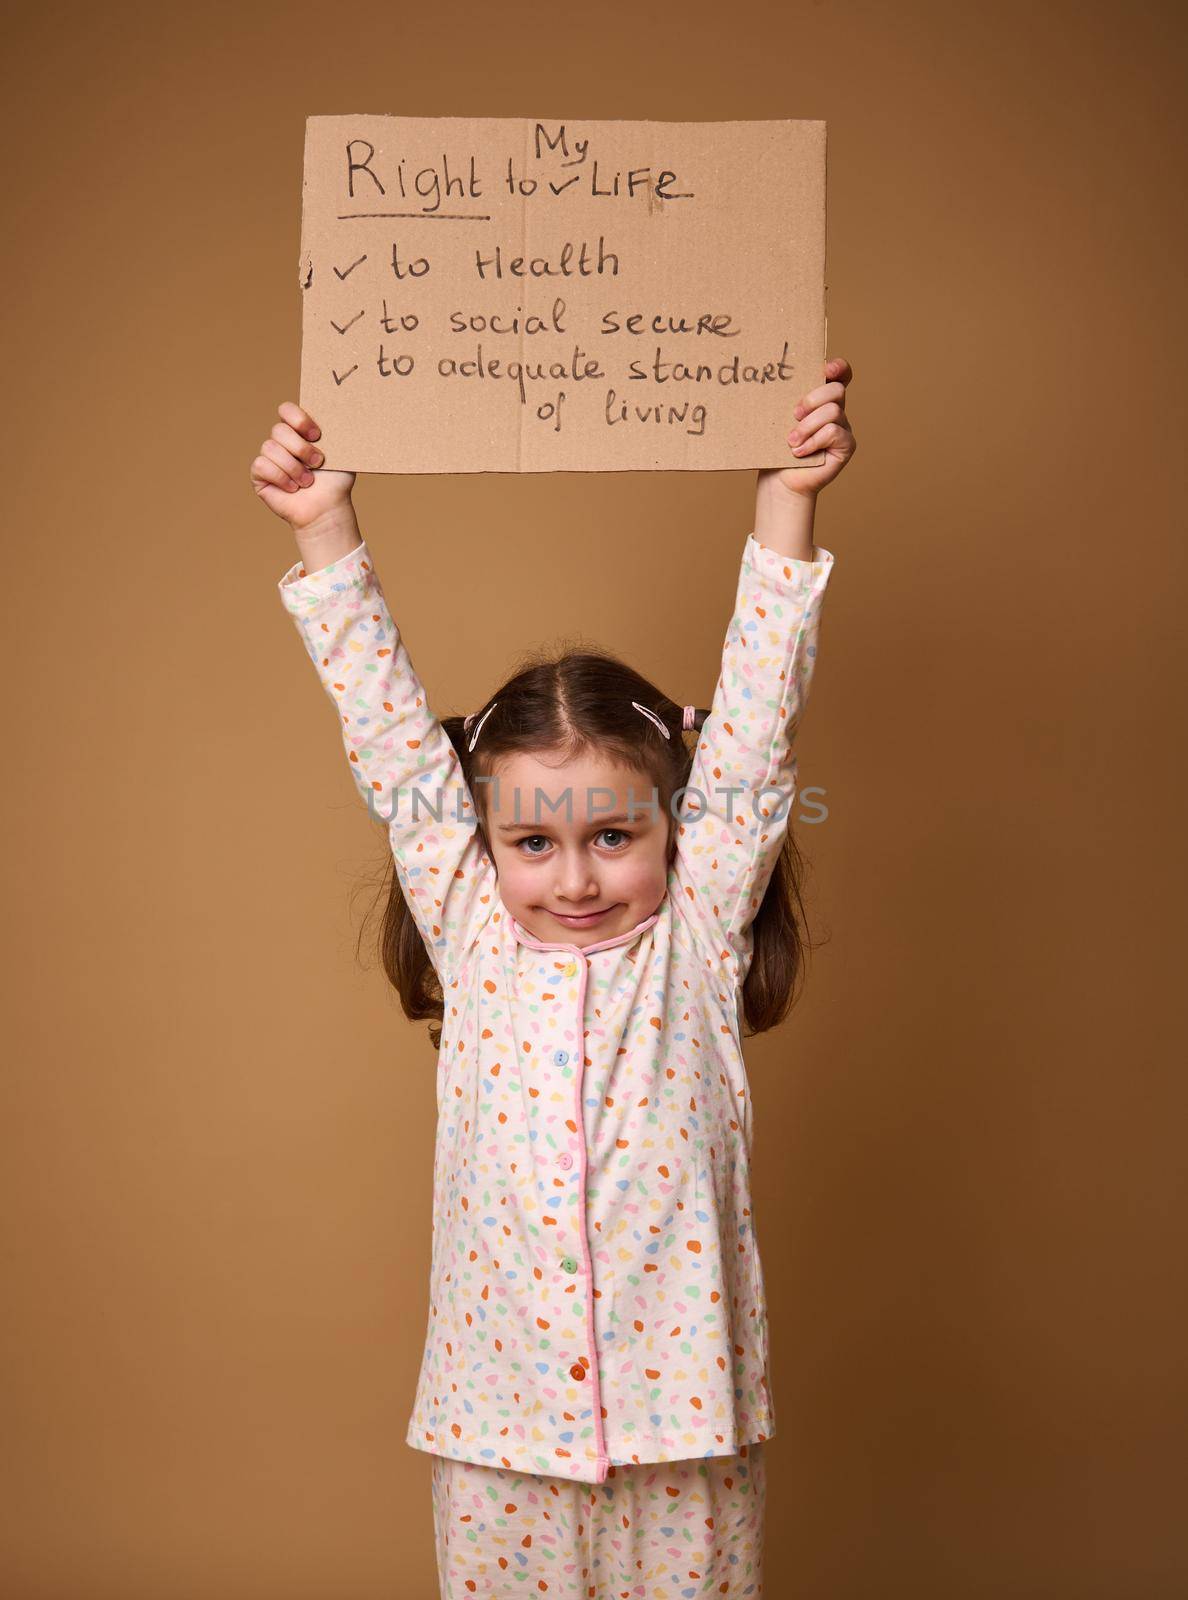 Adorable Caucasian preschool girl holding cardboard poster promoting children's rights to an adequate standard of living, social secure and health care, isolated on a beige background with copy space by artgf